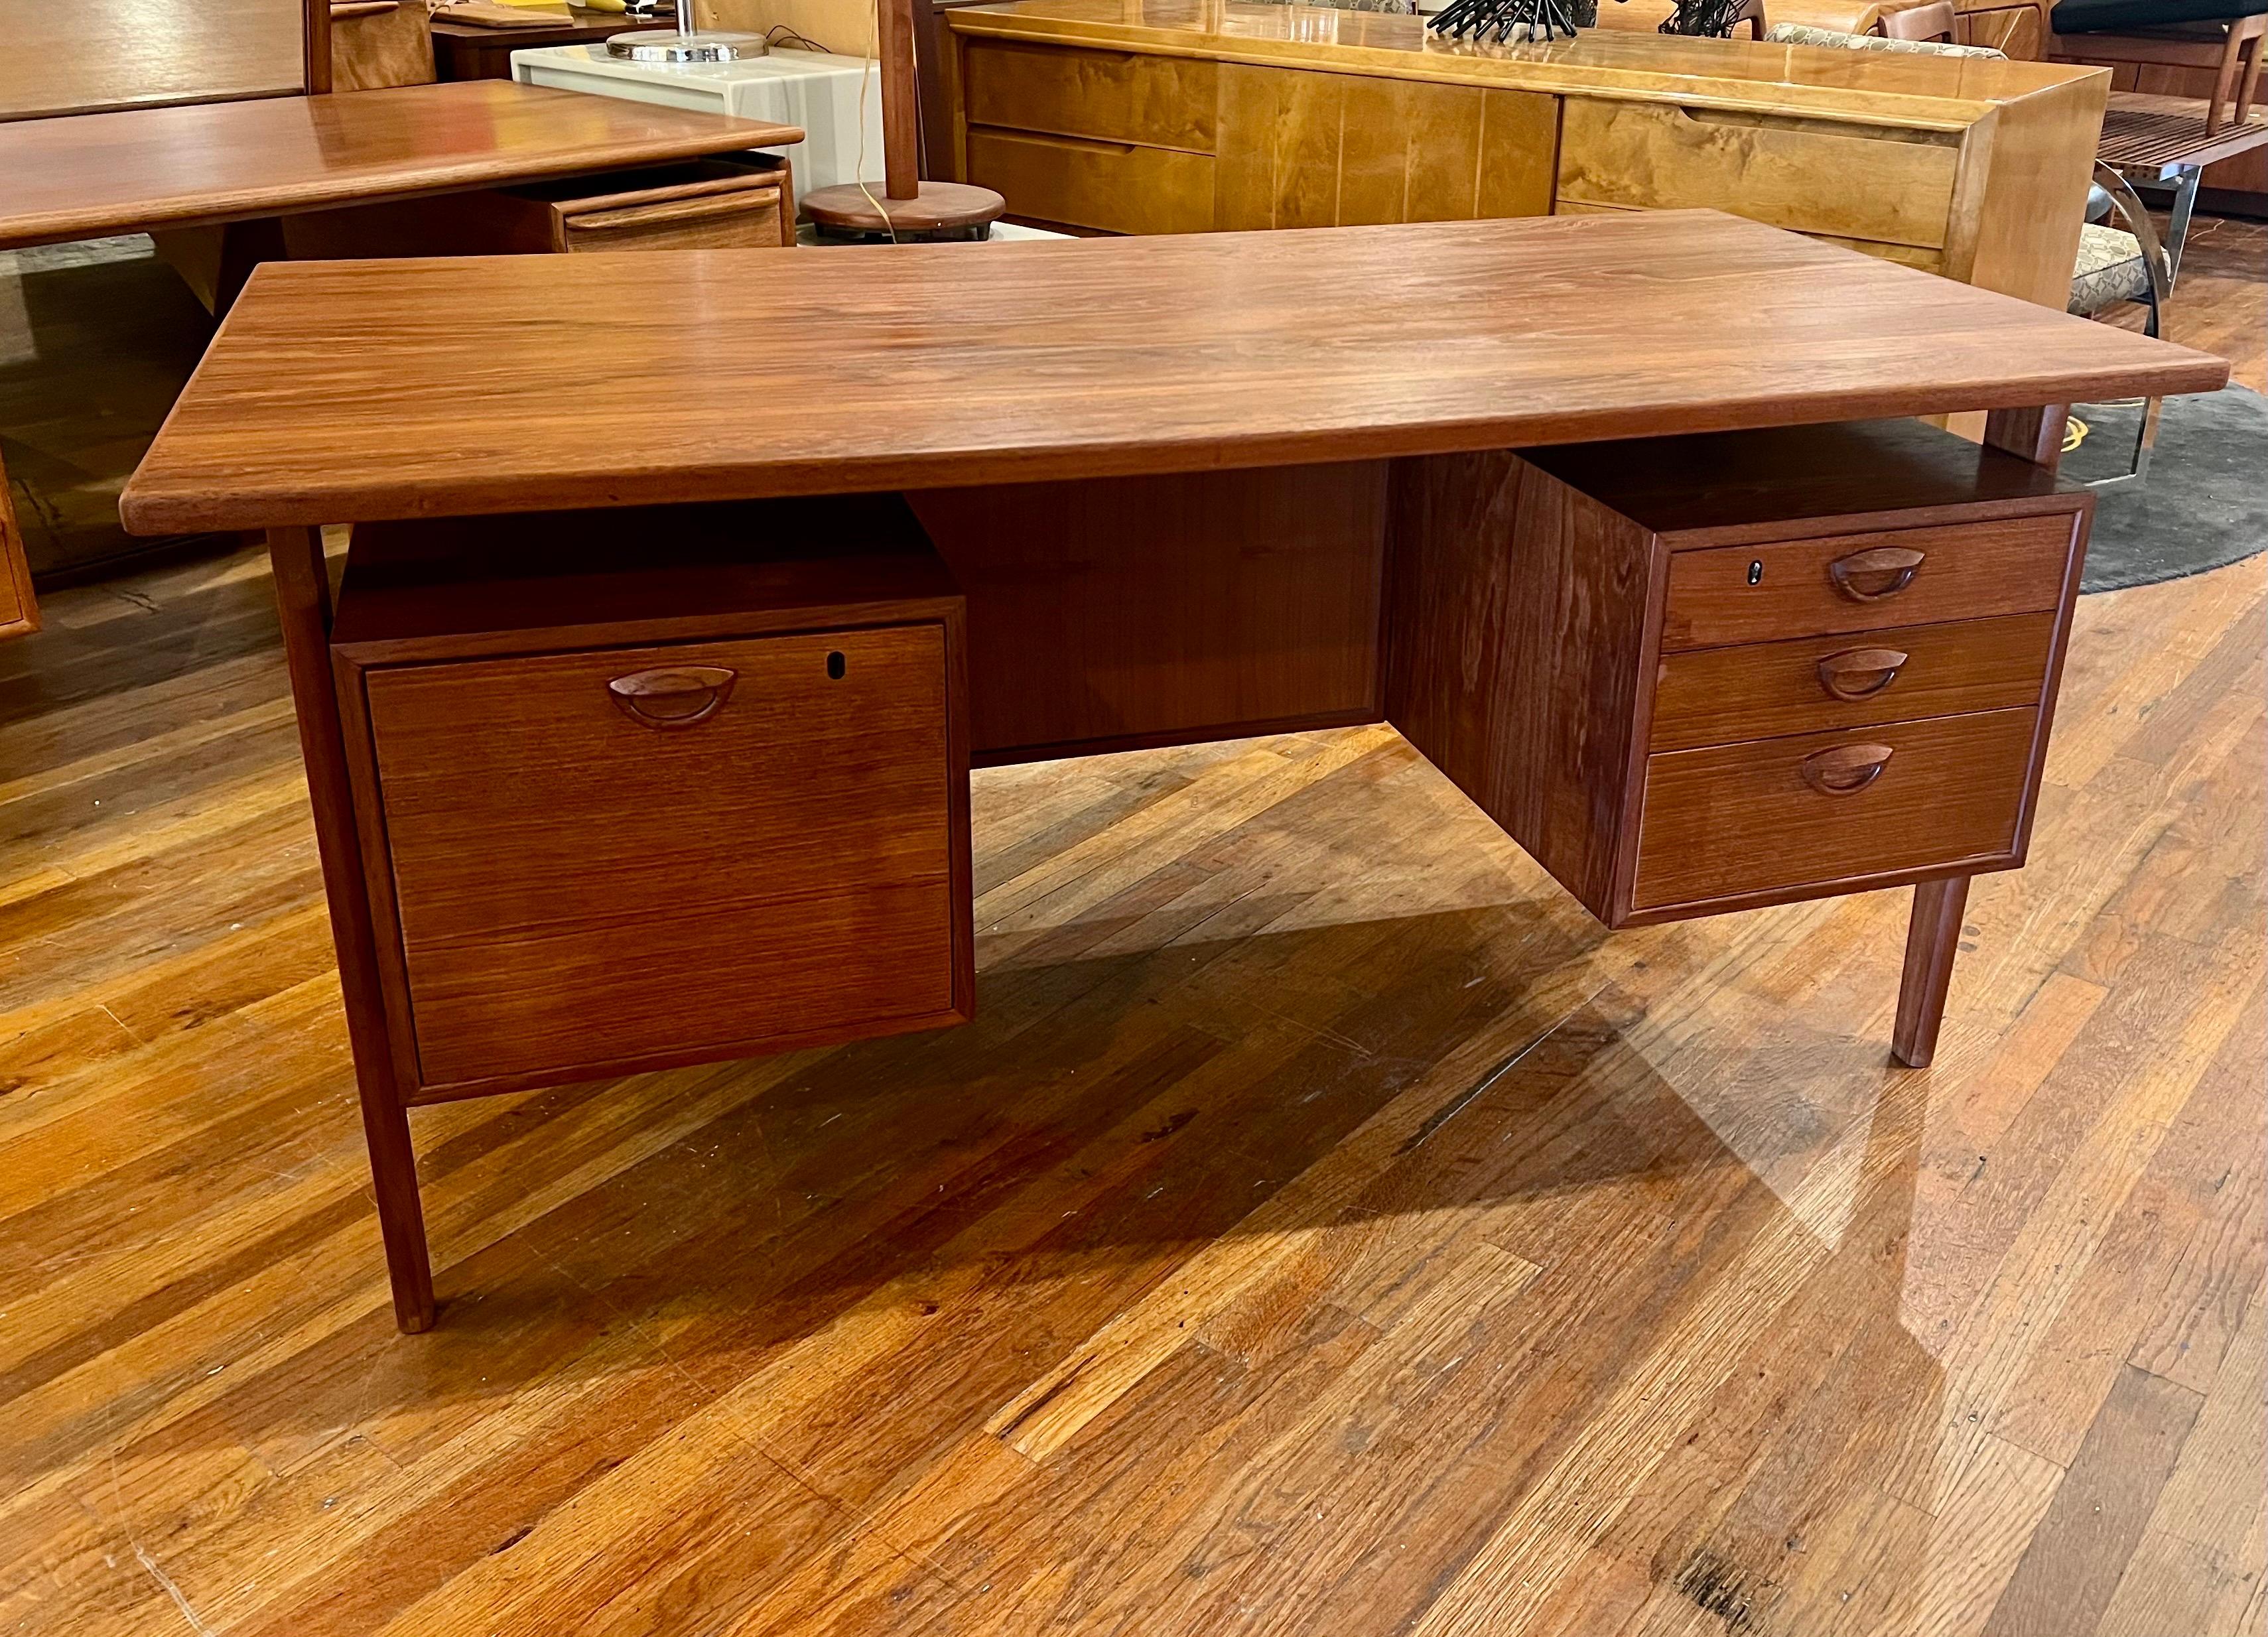 A gorgeous teak executive desk with a floating top, model FM59, designed by architect Kai Kristiansen for Feldballes Mobelfabrik. The top of the Scandinavian writing table floats over a box with a pull-out tray and a large filing drawer on the